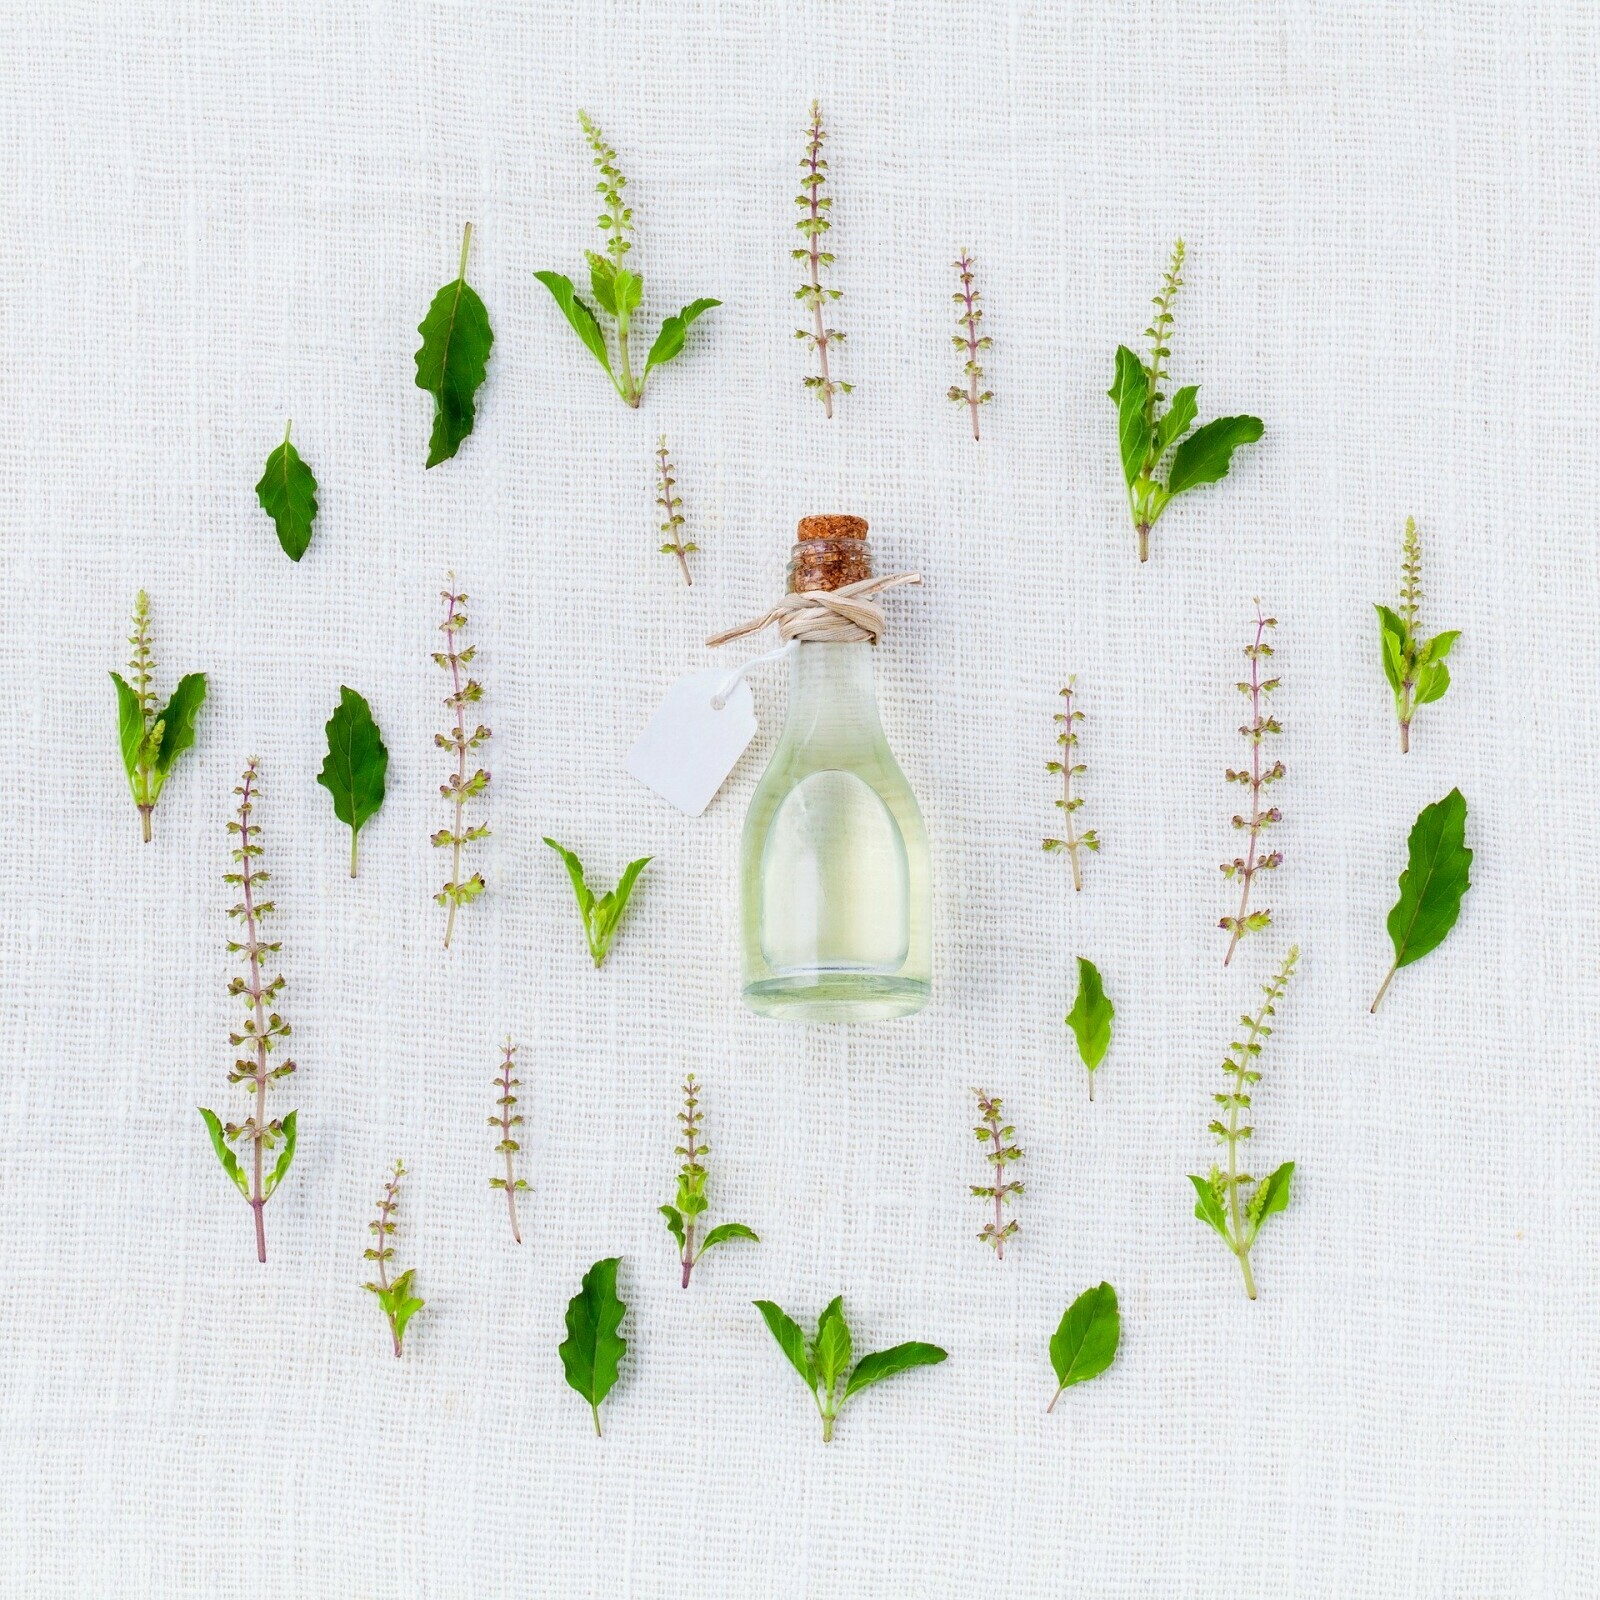 What Can You Expect from Your Aromatherapist?